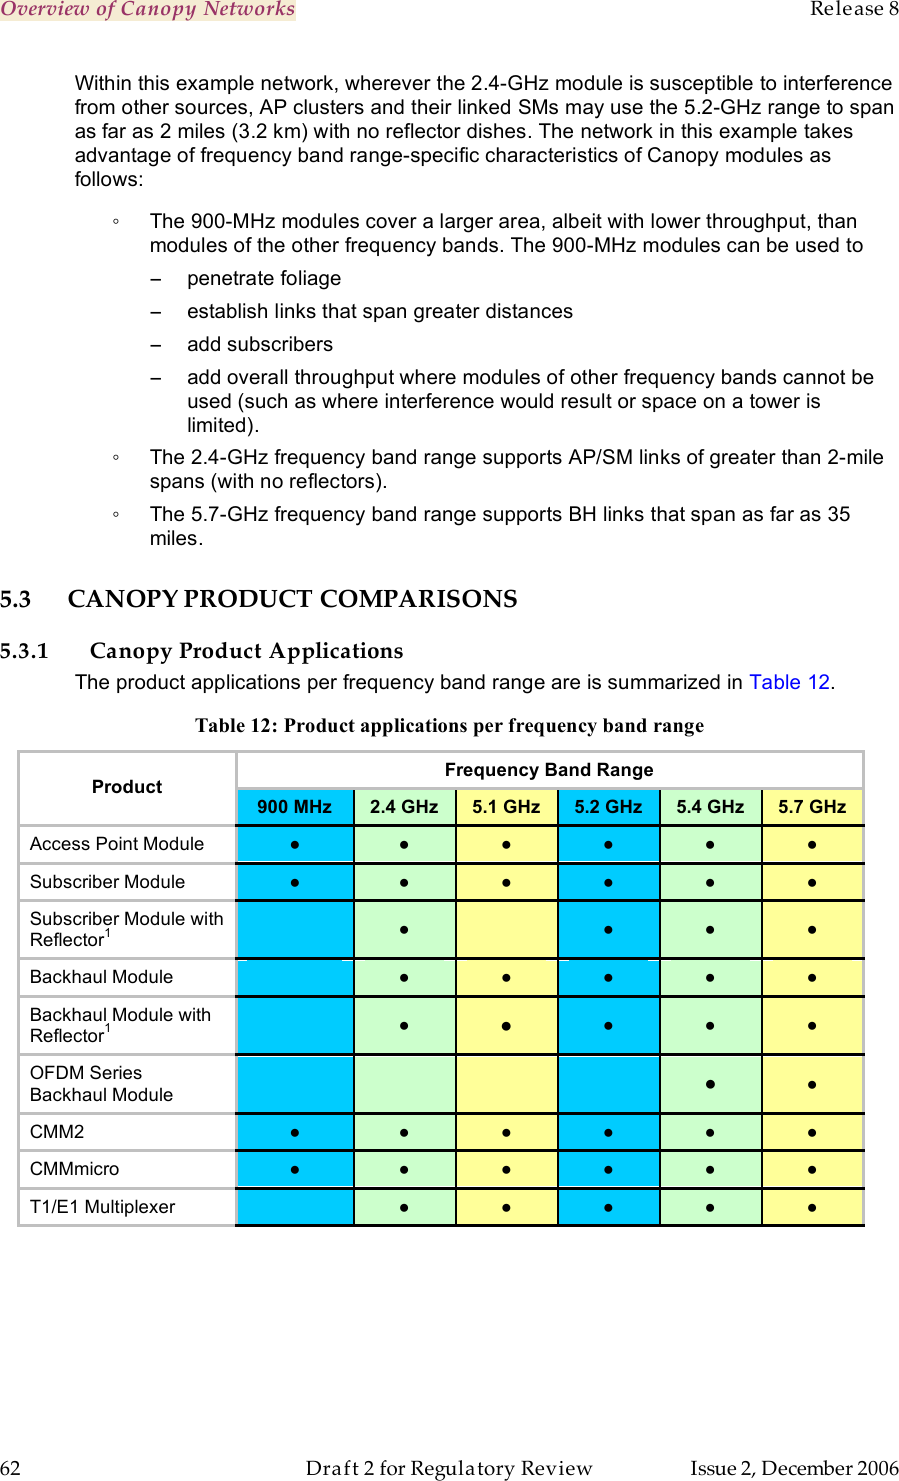 Overview of Canopy Networks    Release 8   62  Draft 2 for Regulatory Review  Issue 2, December 2006 Within this example network, wherever the 2.4-GHz module is susceptible to interference from other sources, AP clusters and their linked SMs may use the 5.2-GHz range to span as far as 2 miles (3.2 km) with no reflector dishes. The network in this example takes advantage of frequency band range-specific characteristics of Canopy modules as follows: ◦  The 900-MHz modules cover a larger area, albeit with lower throughput, than modules of the other frequency bands. The 900-MHz modules can be used to  −  penetrate foliage −  establish links that span greater distances −  add subscribers −  add overall throughput where modules of other frequency bands cannot be used (such as where interference would result or space on a tower is limited). ◦  The 2.4-GHz frequency band range supports AP/SM links of greater than 2-mile spans (with no reflectors). ◦  The 5.7-GHz frequency band range supports BH links that span as far as 35 miles. 5.3 CANOPY PRODUCT COMPARISONS 5.3.1 Canopy Product Applications The product applications per frequency band range are is summarized in Table 12. Table 12: Product applications per frequency band range Frequency Band Range Product 900 MHz 2.4 GHz 5.1 GHz 5.2 GHz 5.4 GHz 5.7 GHz Access Point Module ● ● ● ● ● ● Subscriber Module ● ● ● ● ● ● Subscriber Module with Reflector1  ●  ● ● ● Backhaul Module  ● ● ● ● ● Backhaul Module with Reflector1  ● ● ● ● ● OFDM Series Backhaul Module     ● ● CMM2 ● ● ● ● ● ● CMMmicro ● ● ● ● ● ● T1/E1 Multiplexer  ● ● ● ● ● 